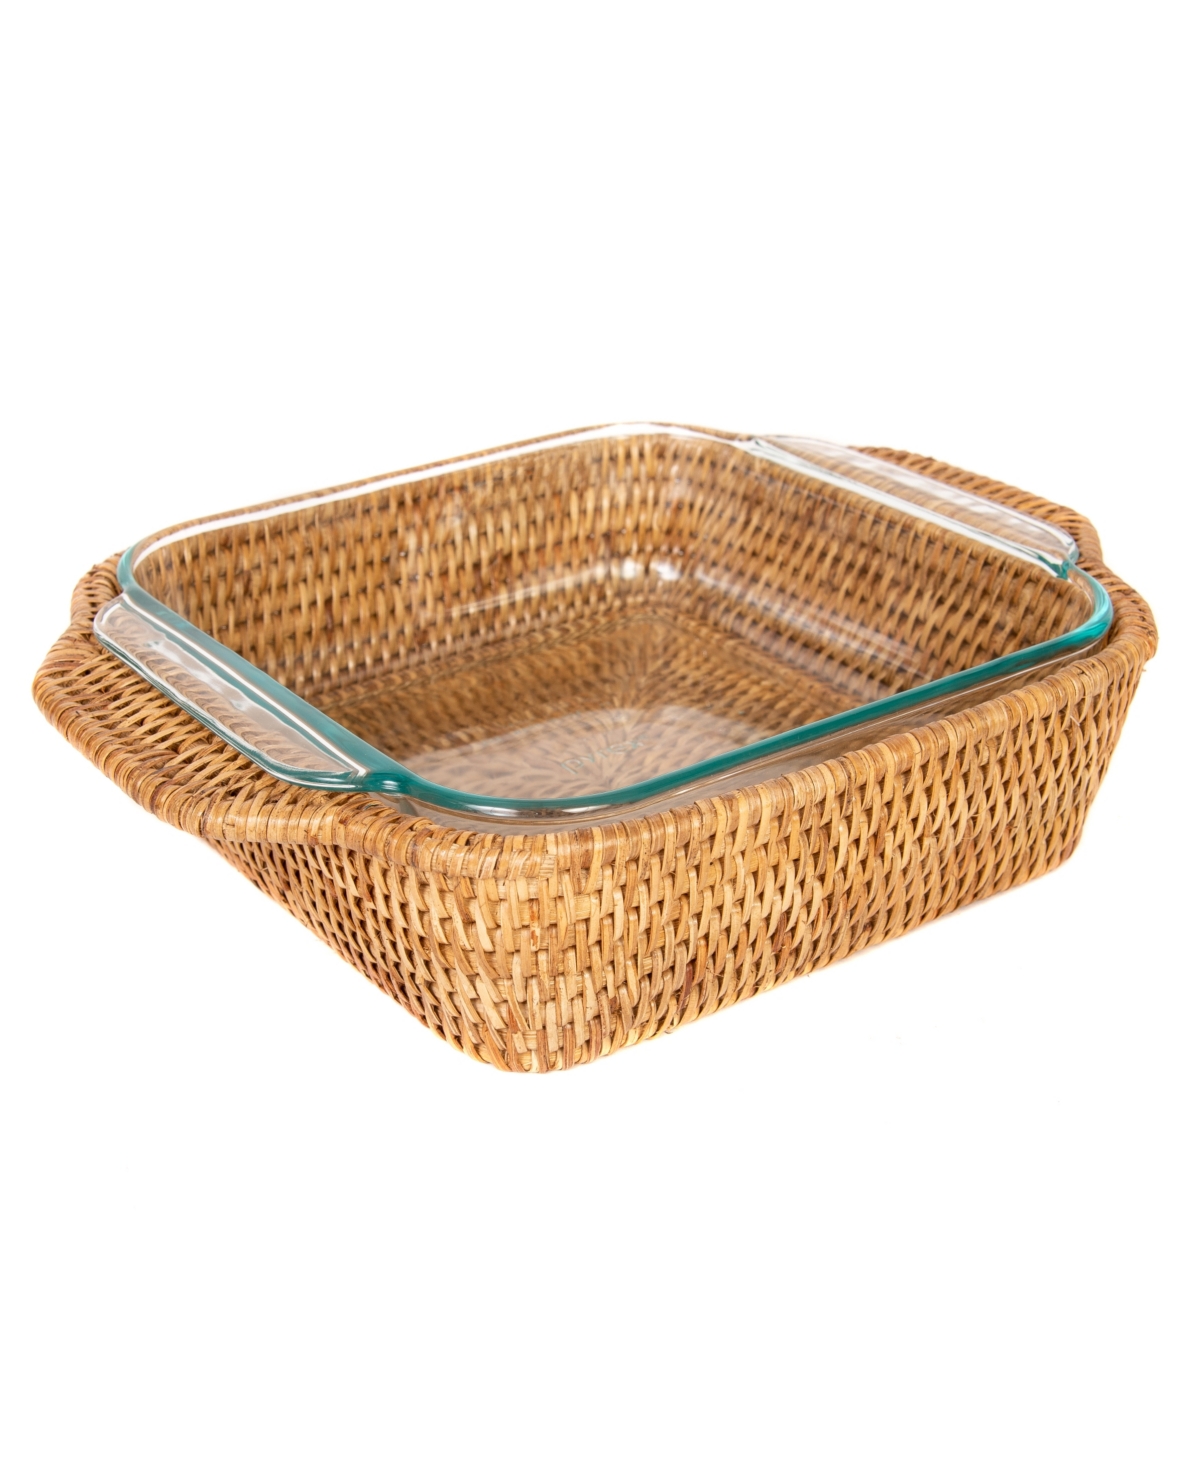 Artifacts Trading Company Artifacts Rattan Square Baker Basket With Pyrex In Honey Brown